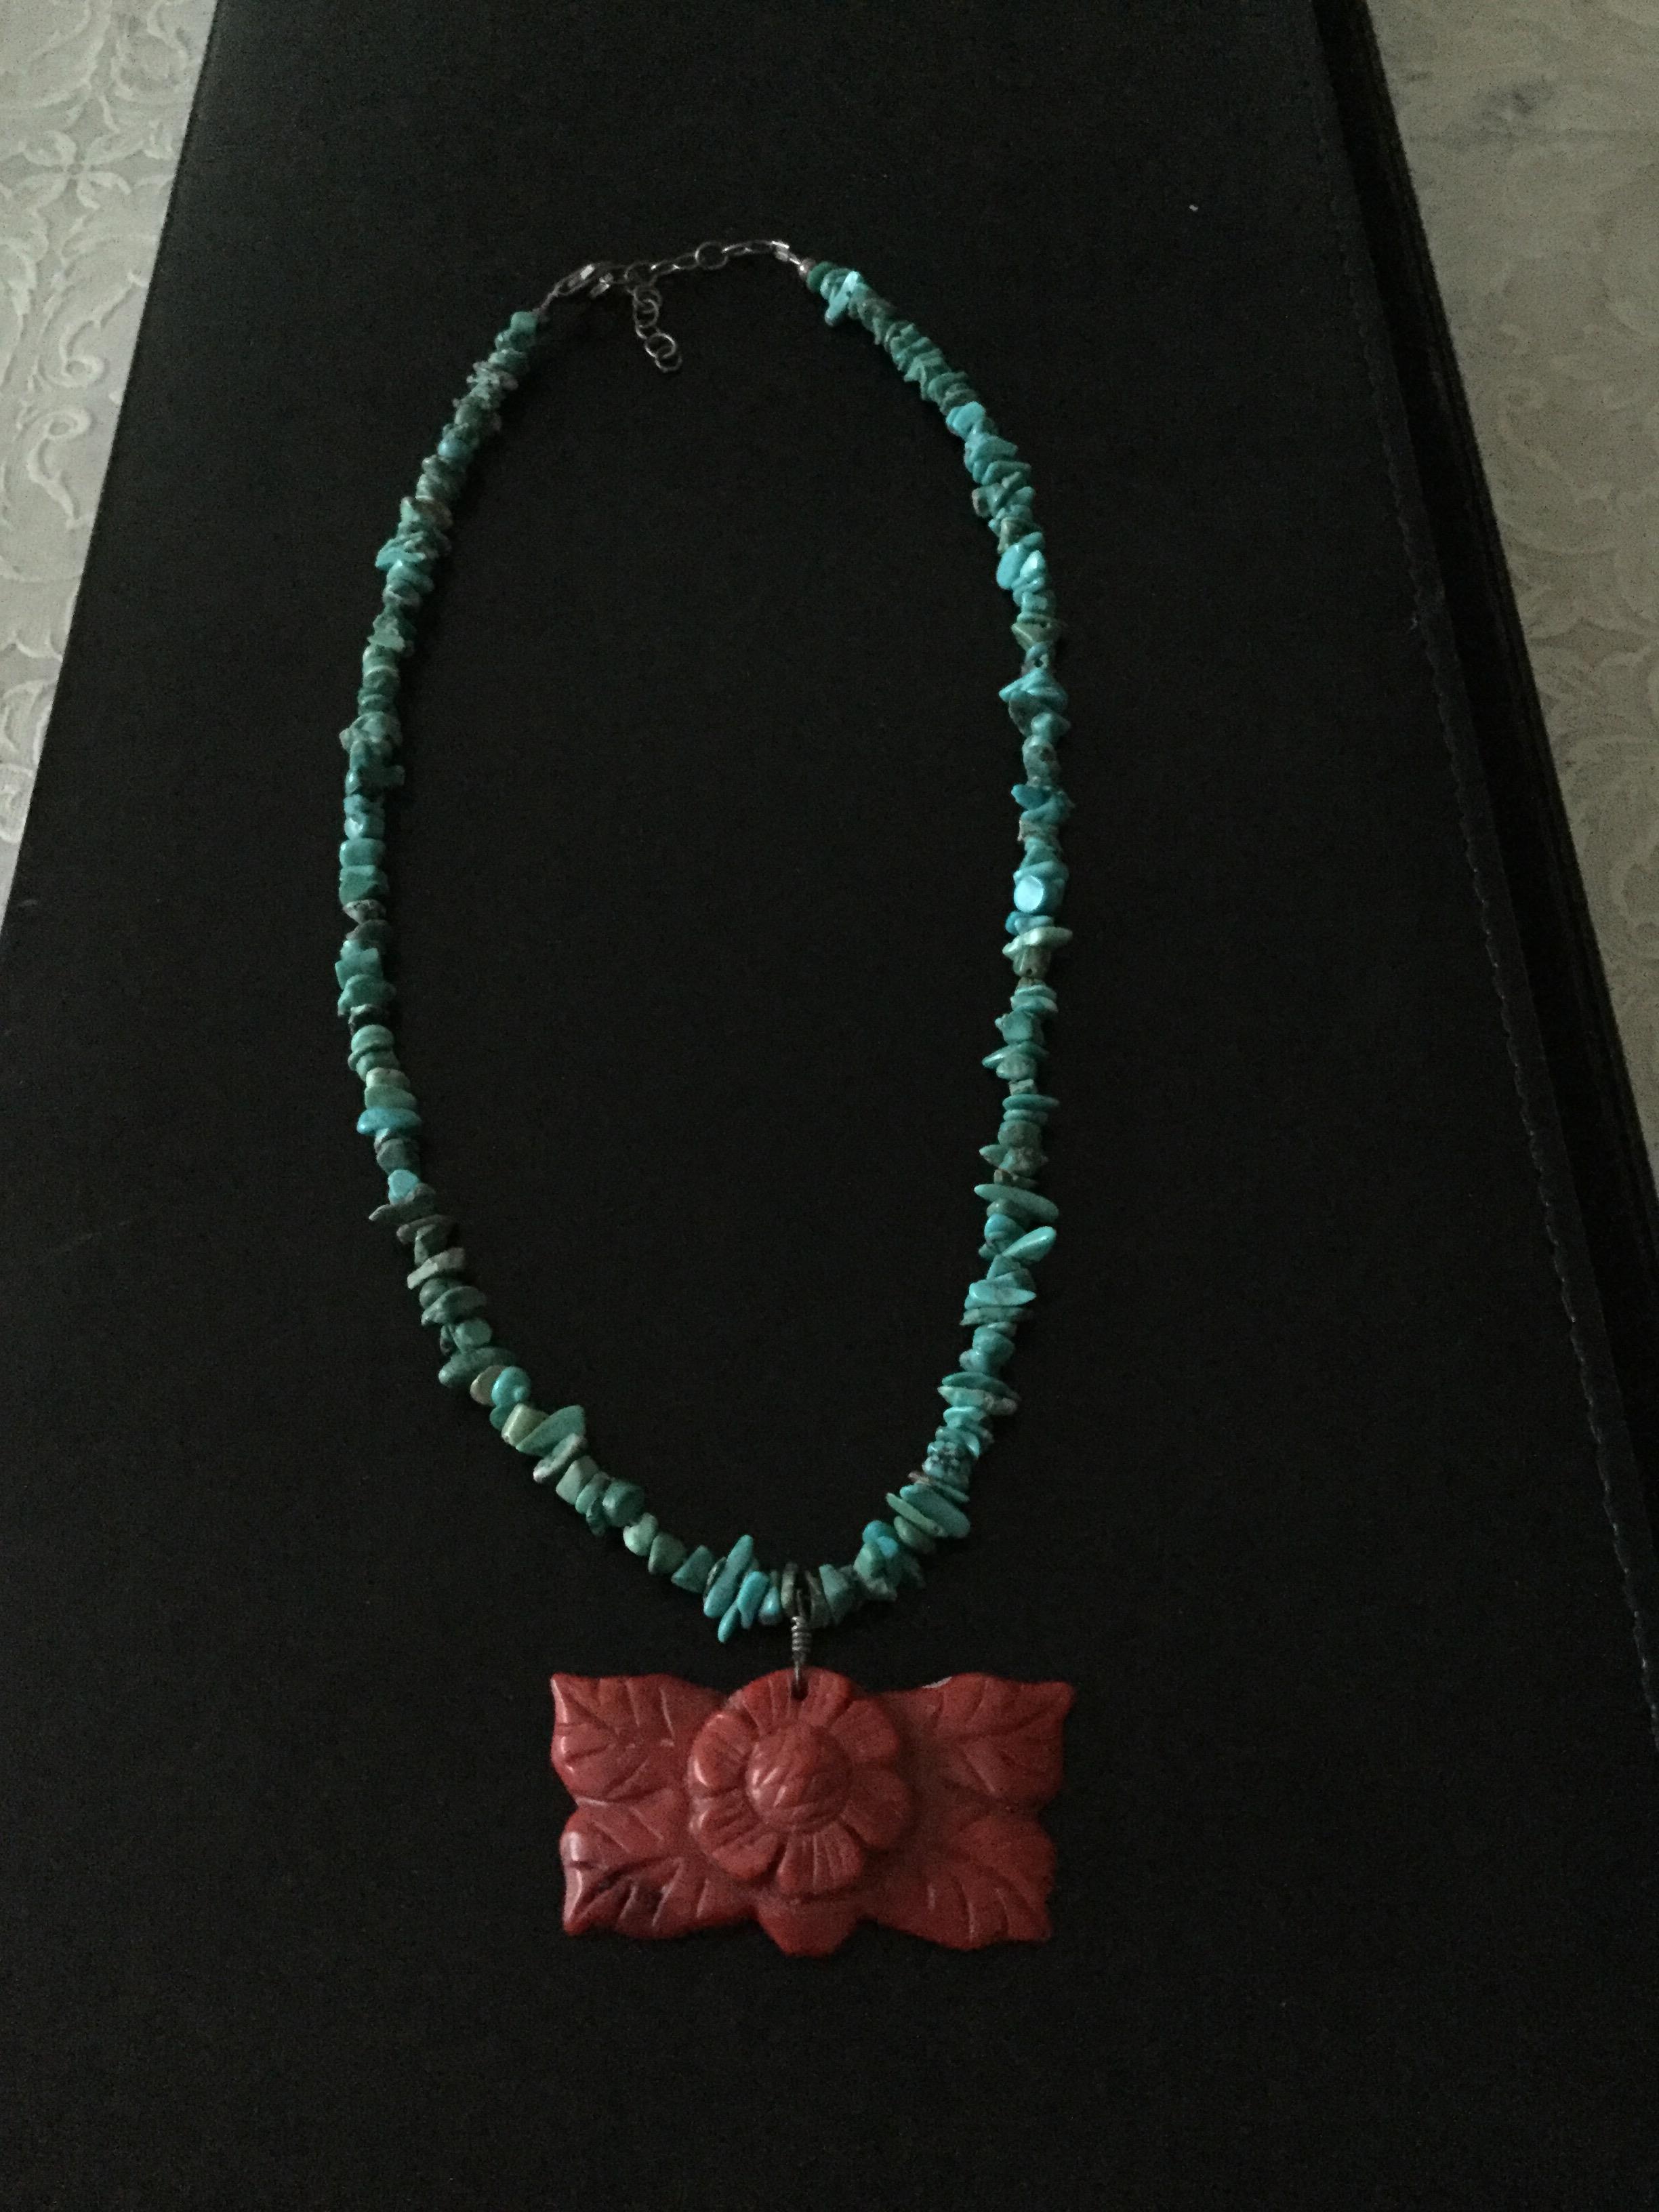 Turquoise and Coral Necklace - Image 2 of 6